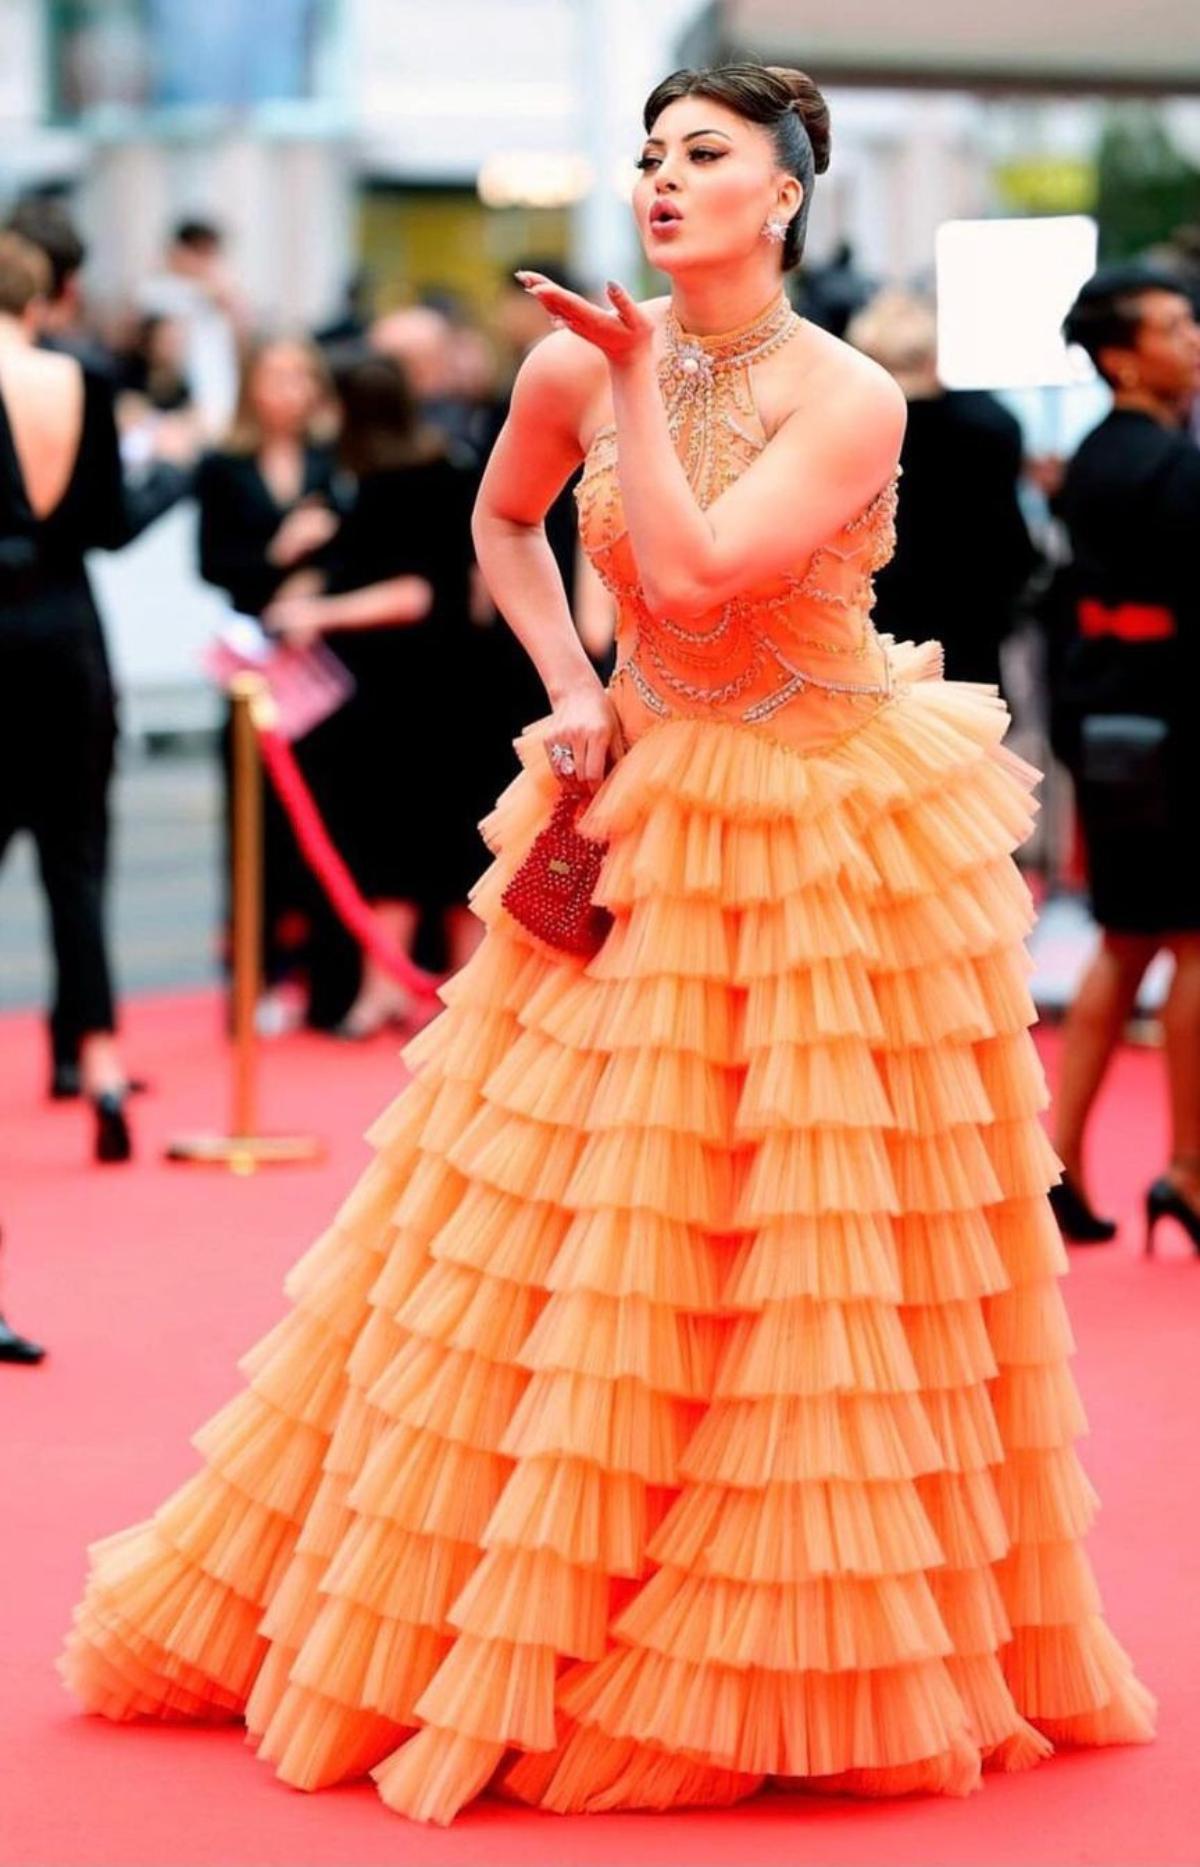 Urvashi Rautela who made headlines for wearing a crocodile necklace with her pink tulle gown on day one at the Cannes Film Festival, stepped out in a frilly orange gown with a halter neck and crystal detailings on the second day.  She carried a small red beaded bag to compliment her eye-popping attire. For makeup, Urvashi opted for a soft glam look.